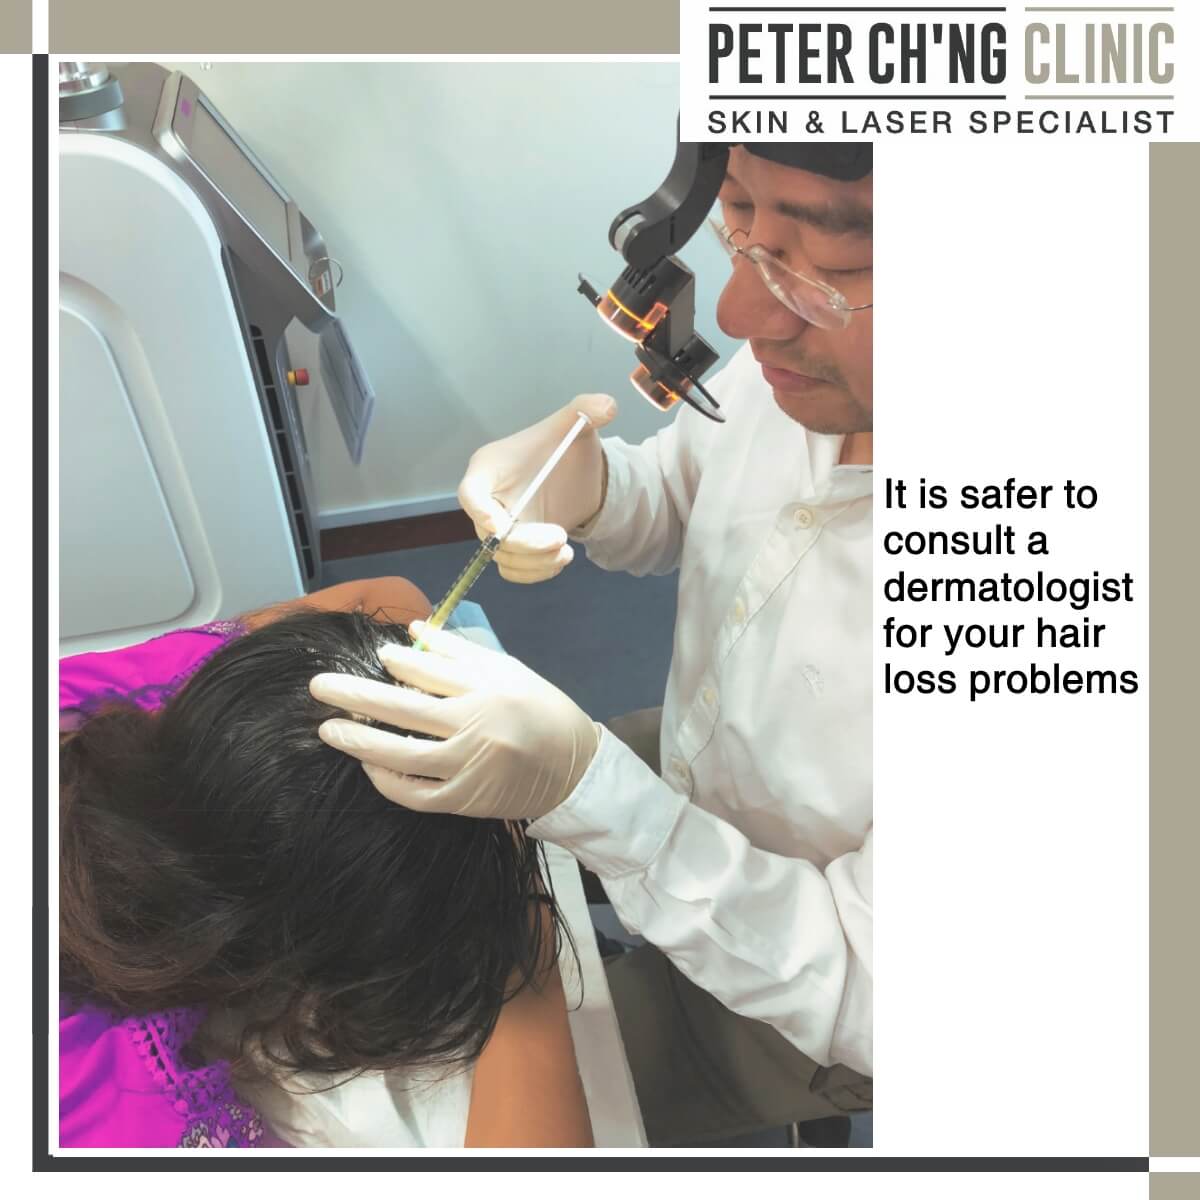 Patient Mailbox: How to Treat Hair Loss | Peter Ch'ng Skin Specialist - KL,  Malaysia